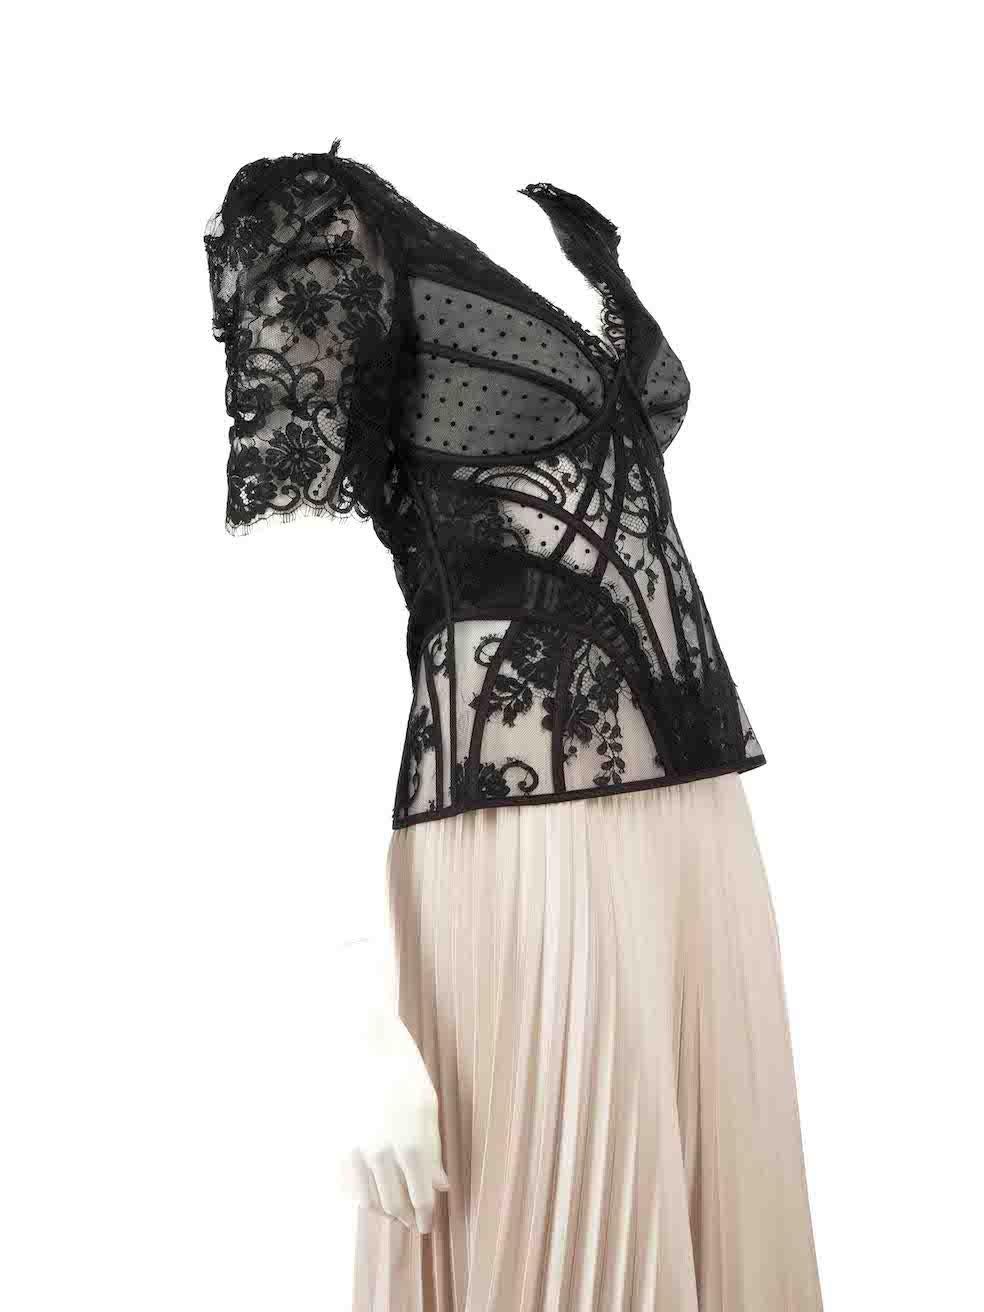 CONDITION is Very good. Hardly any visible wear to top is evident on this used Zimmermann designer resale item.
 
Details
Black
Lace
Top
Gathered short sleeves
See through
Structured netting underlay
 V-neck
 Back zip fastening
 
Made in China
